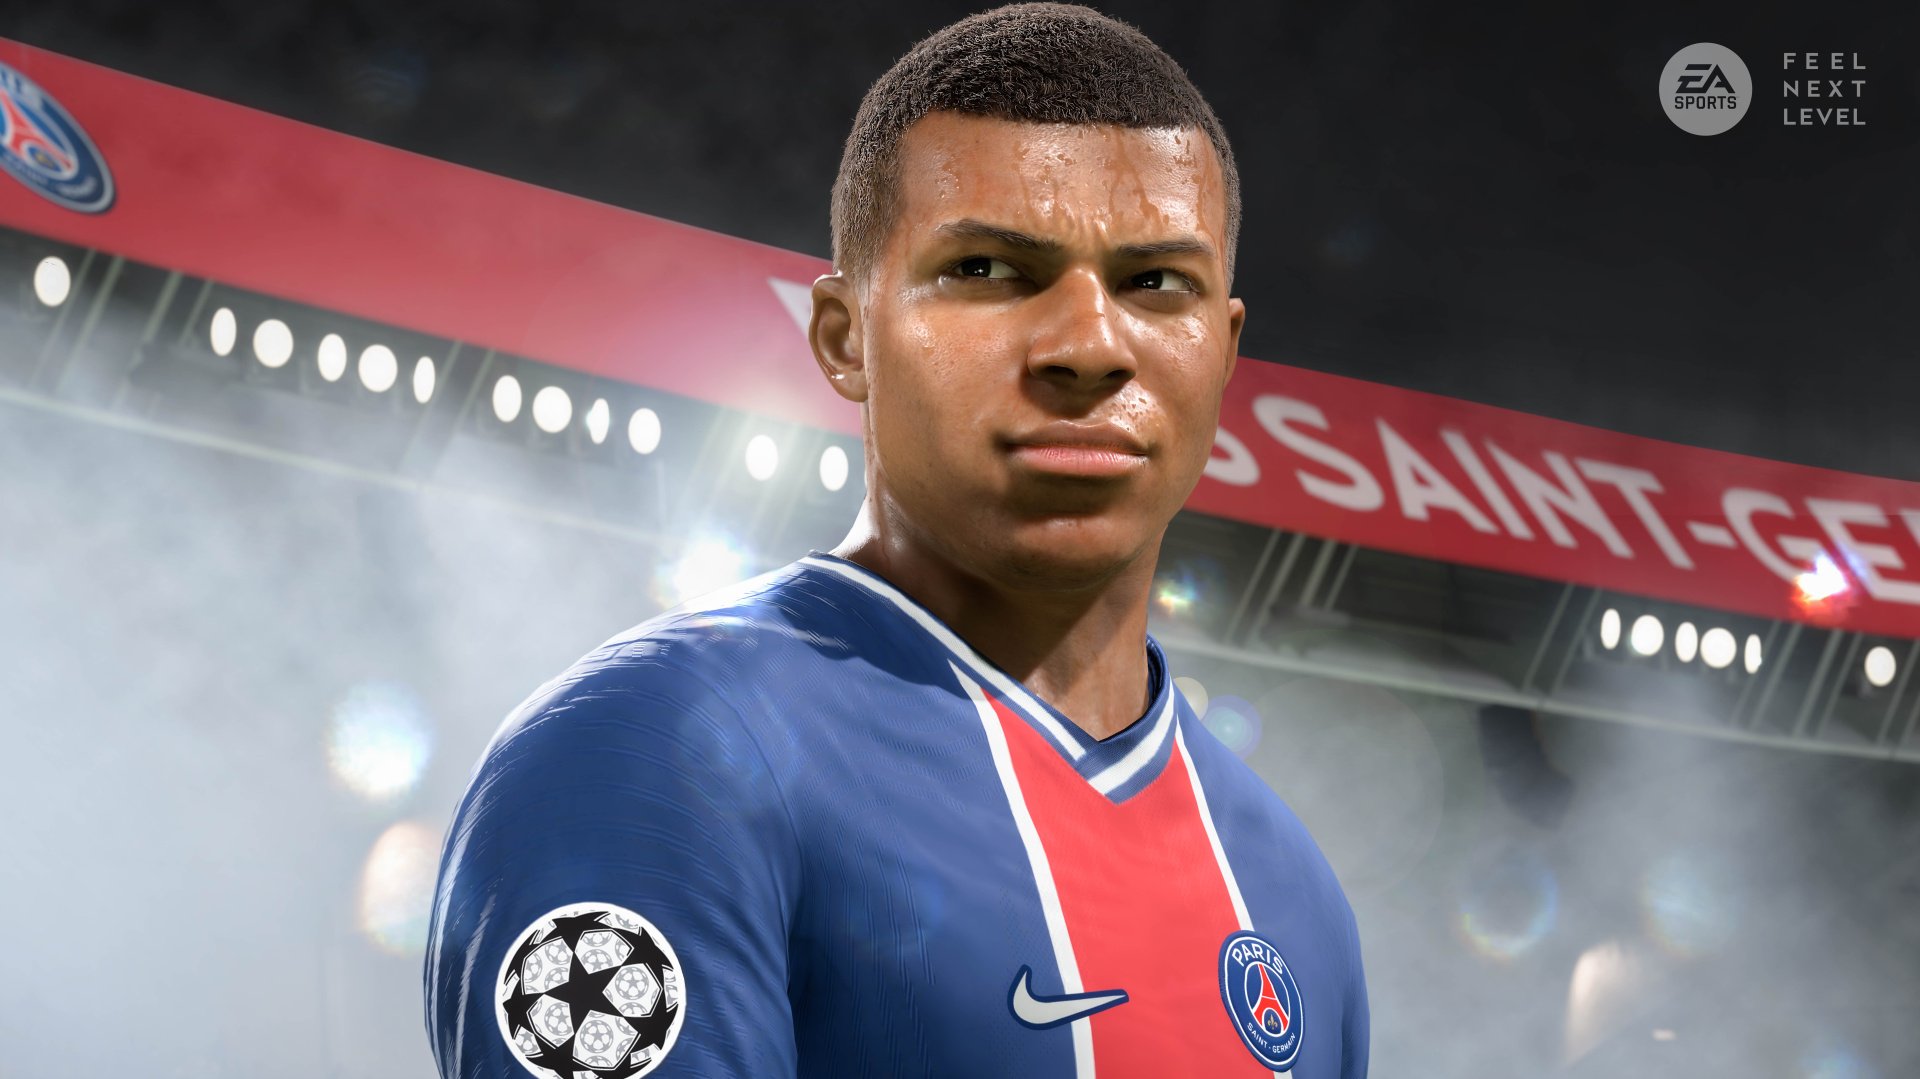 FIFA 21 (for PlayStation 4) Review